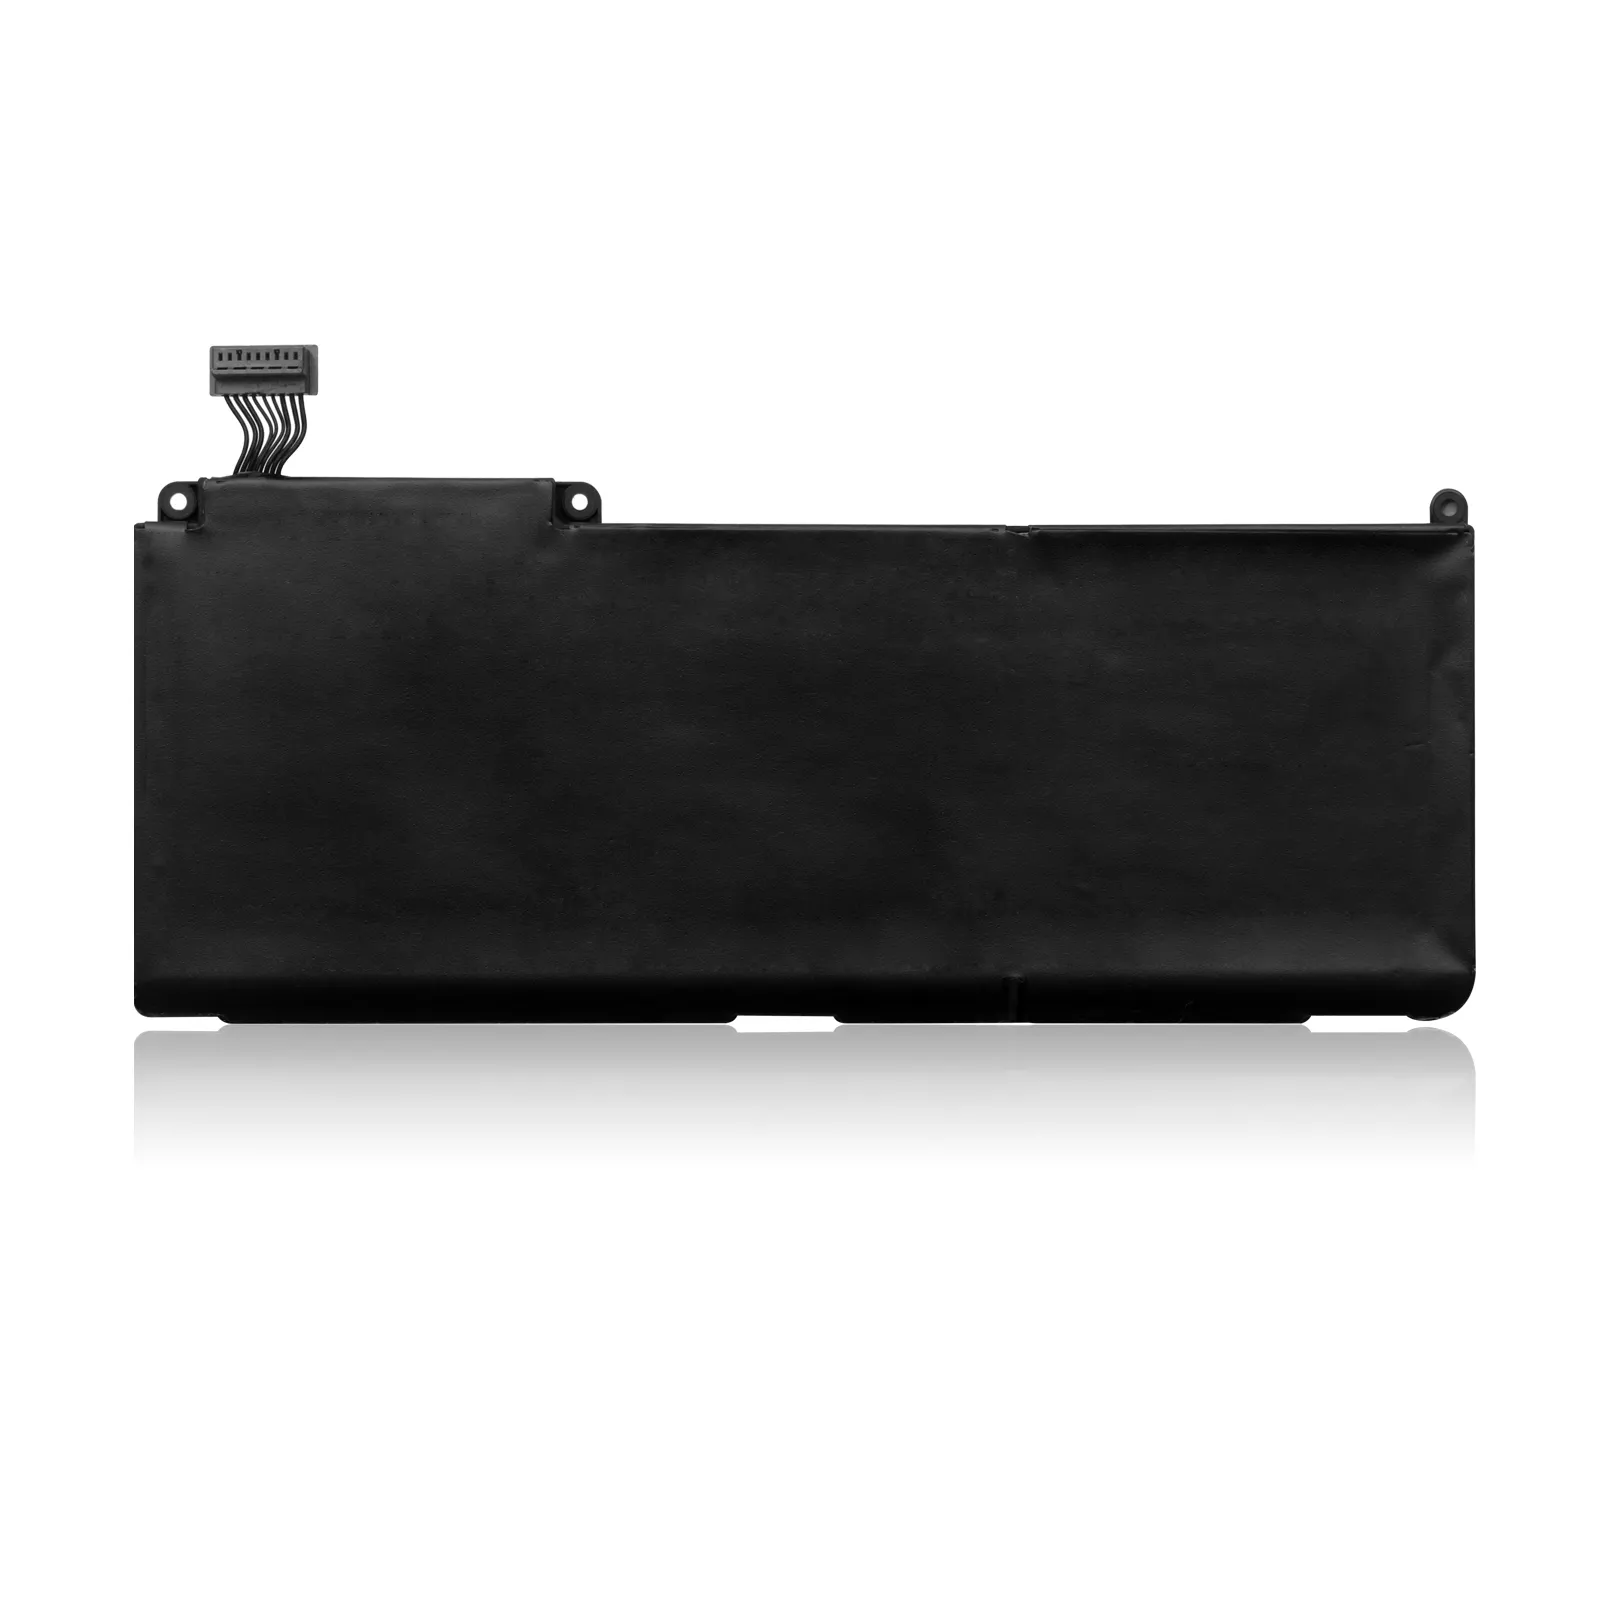 DNS mac laptop battery A1331 replacement for MacBook A1342 PRO 13 inch 2009 2010 battery A1331